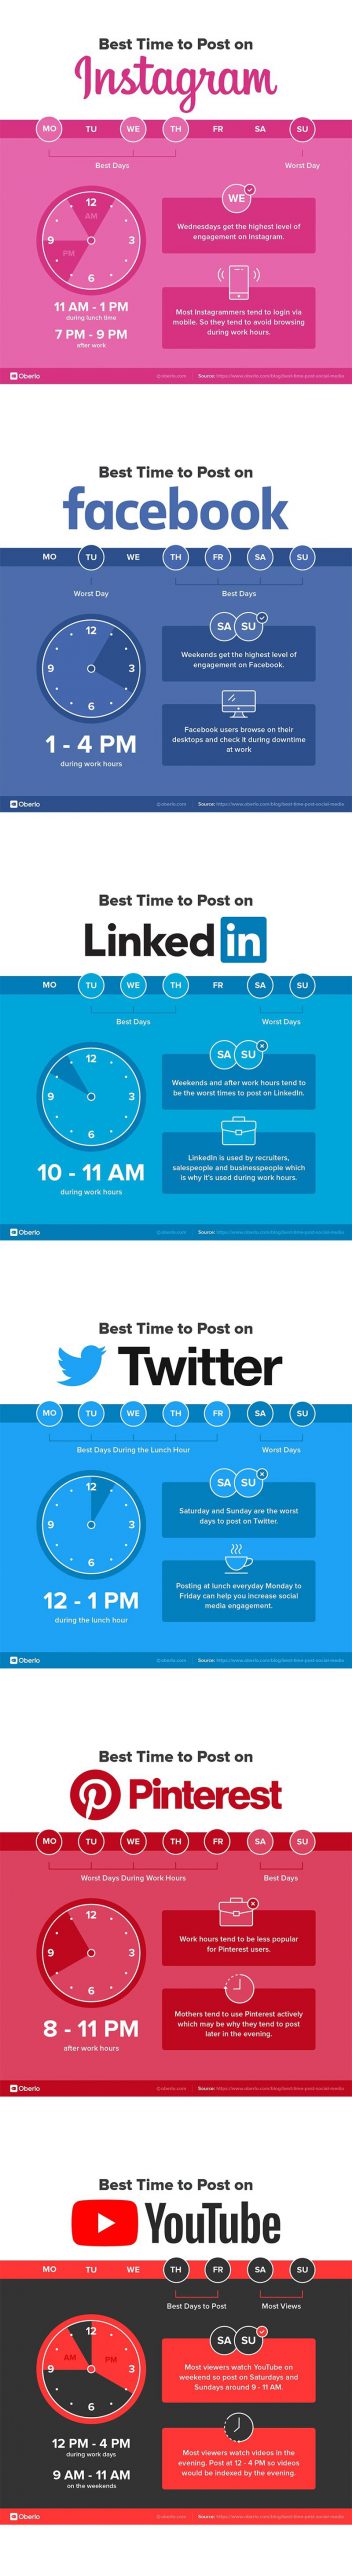 the best times to post on social media in 2021 and beyond infographic scaled 1